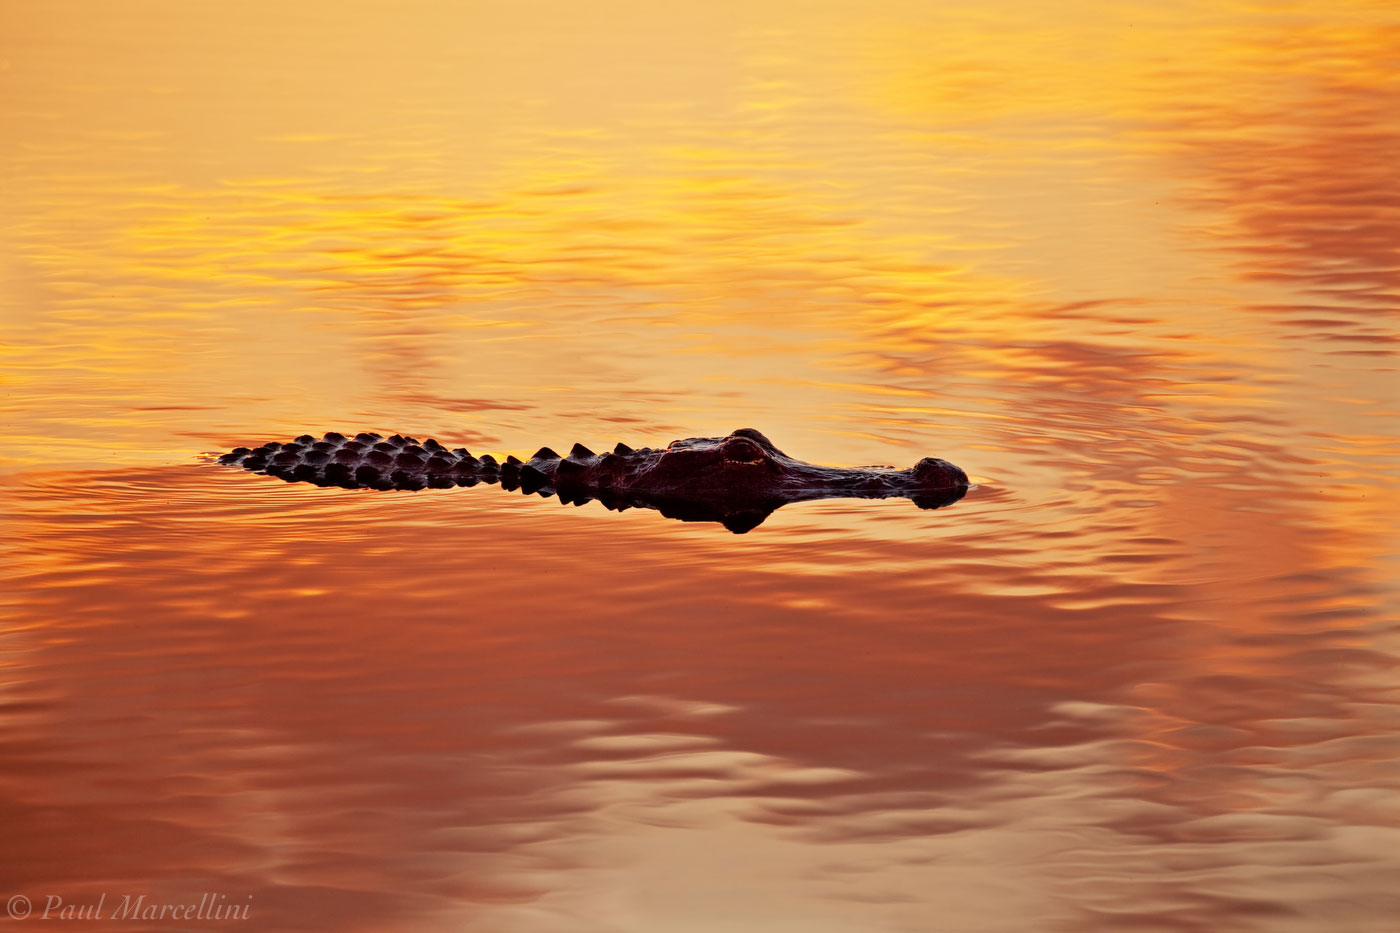 An American alligator (Alligator mississippiensis) swimming in vibrant reflected sunset color.